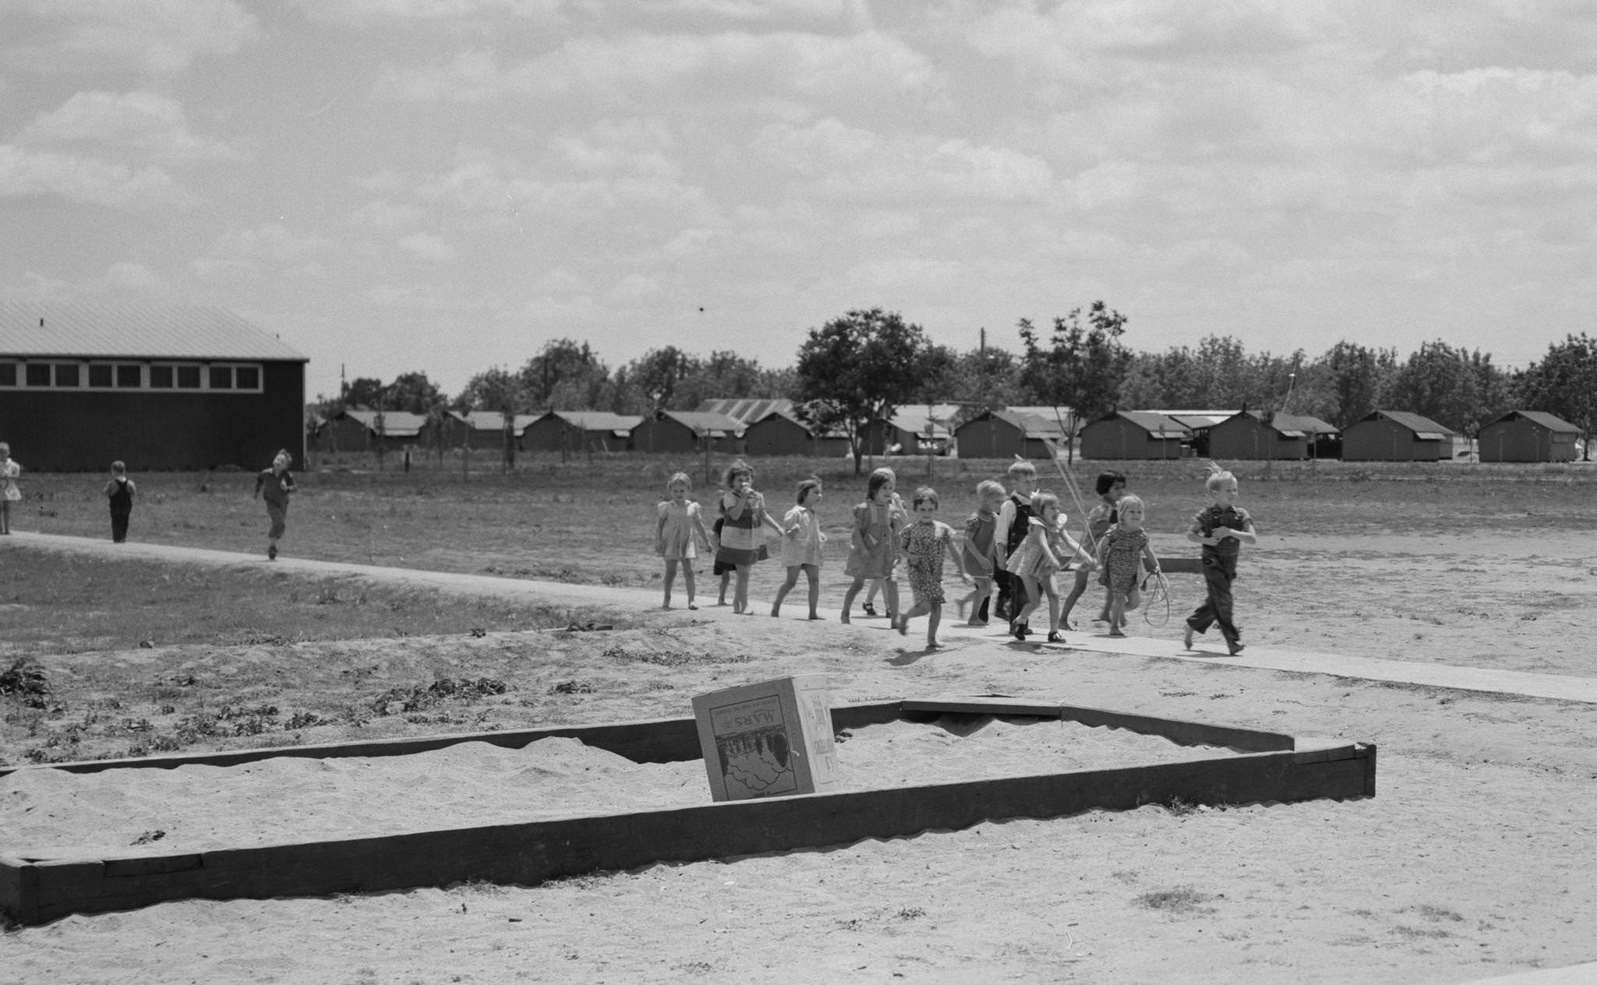 Farm Security Administration (FSA) camp for migrant agricultural workers, 1938